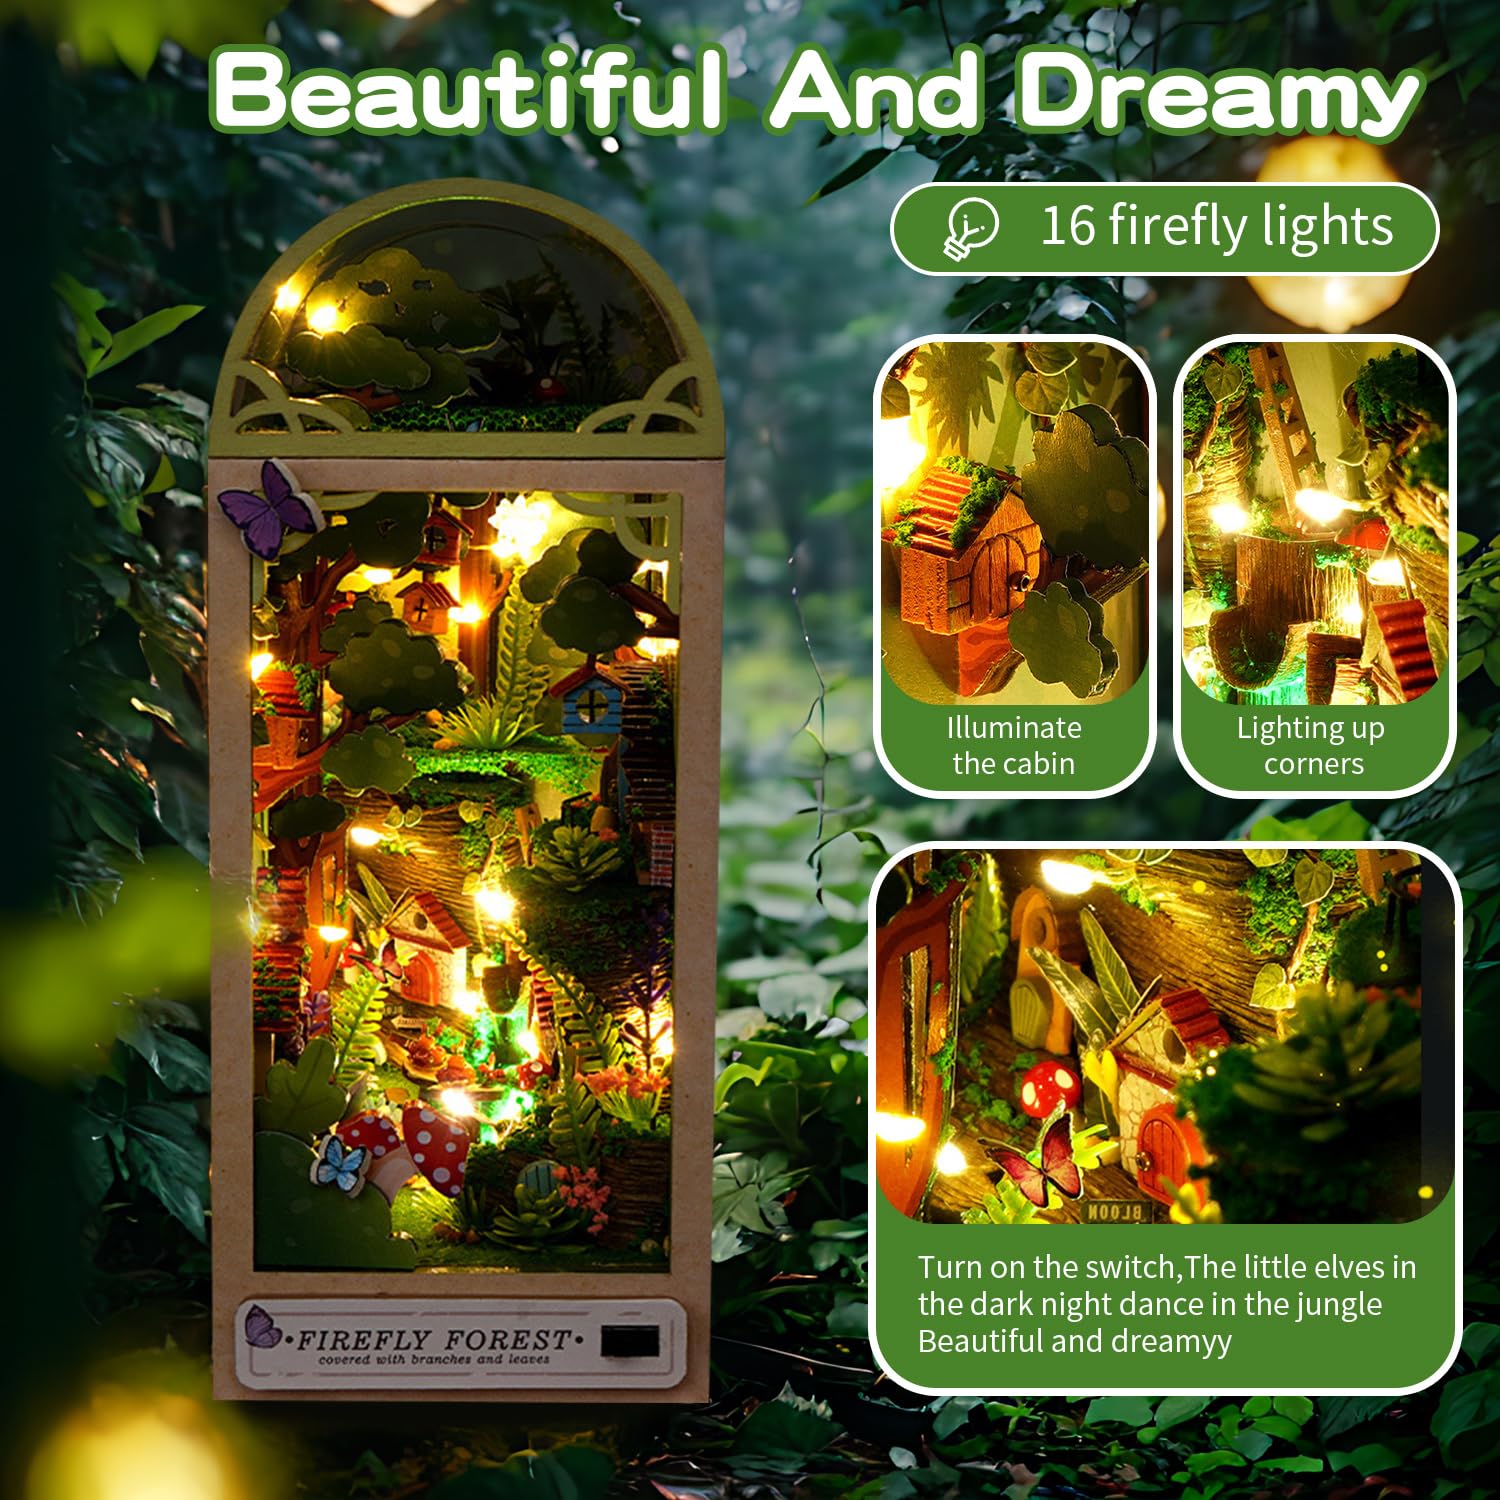 DlY Dollhouse Booknook · Firefly Forest